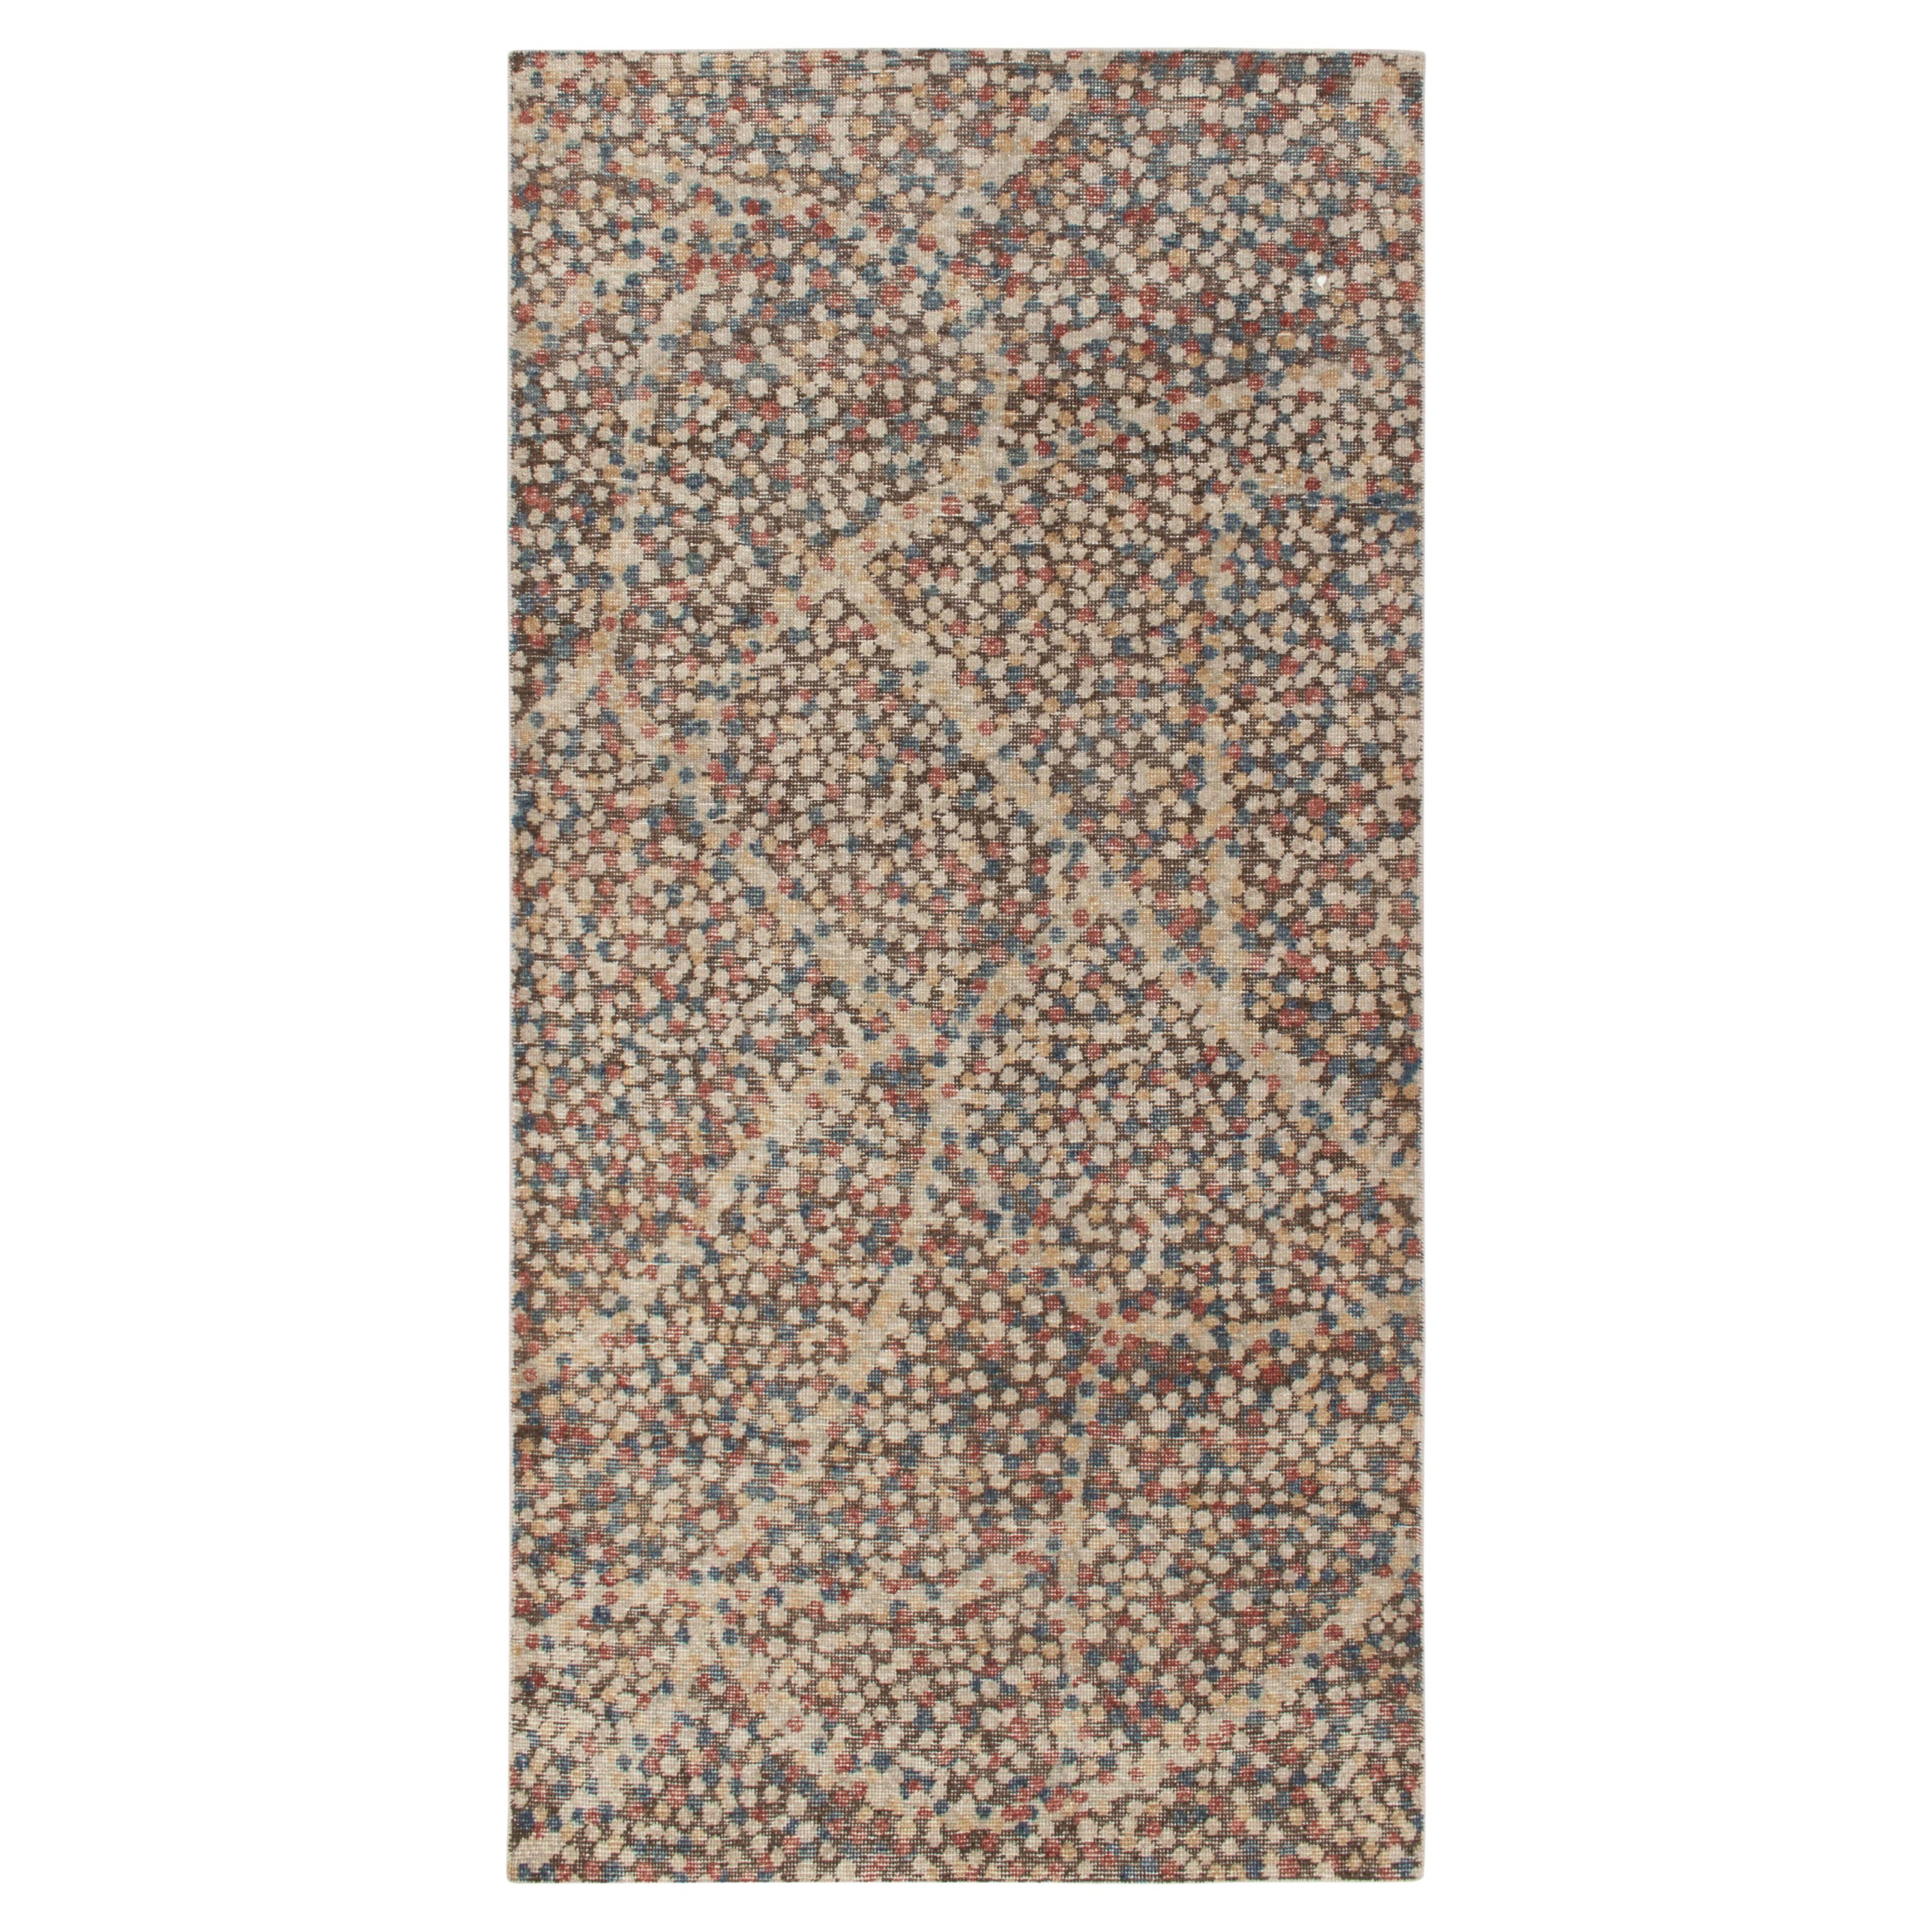 Rug & Kilim's Distressed Abstract Rug in Brown, Red & Blue Dots Pattern For Sale